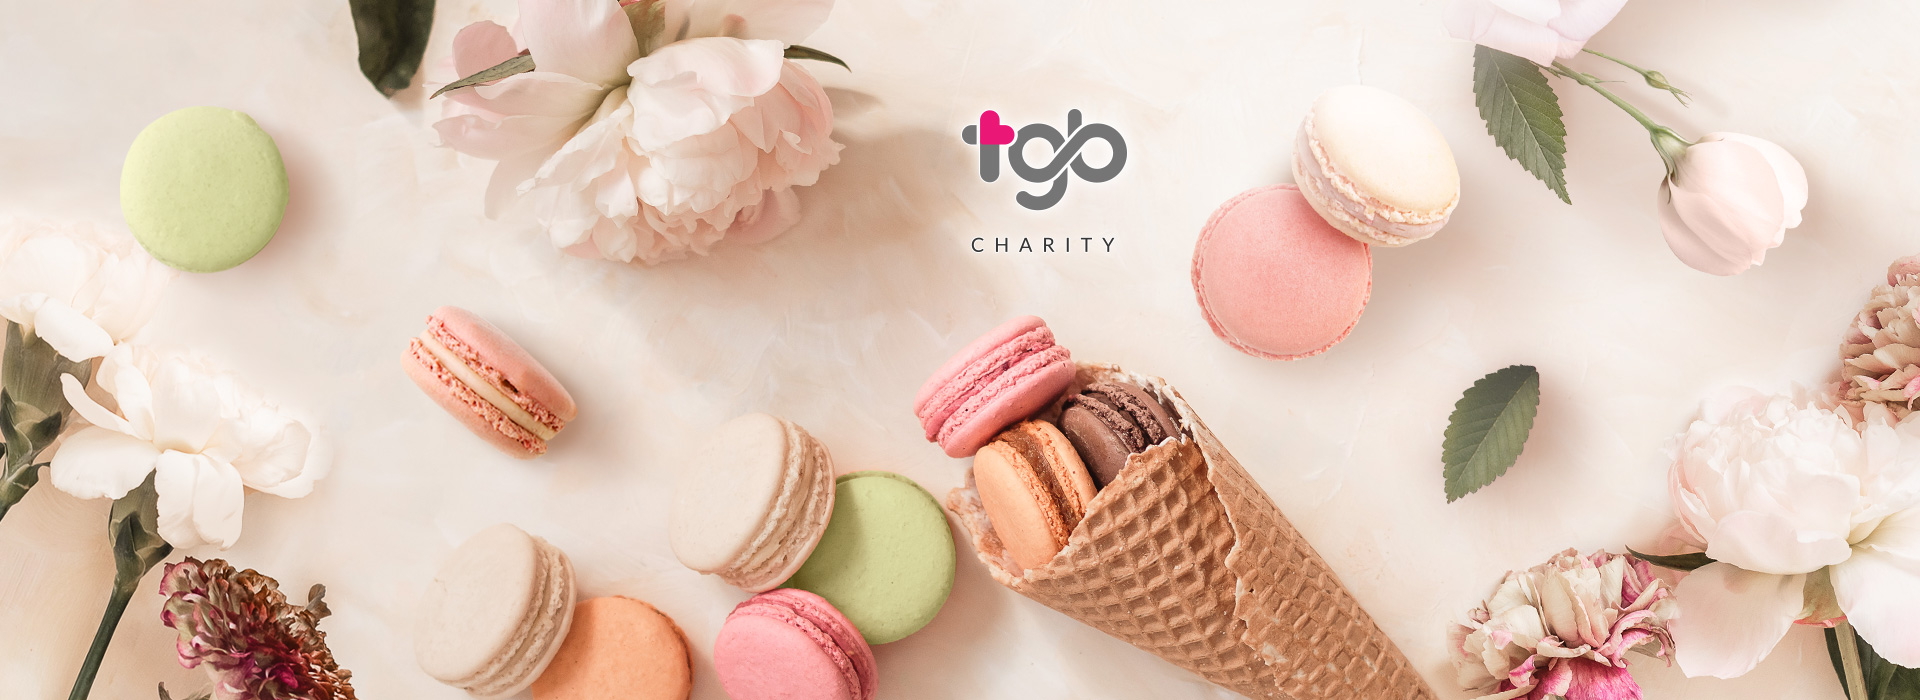 TGB Charity: Enjoy your life and help the Earth at the same time with sustainable desserts!